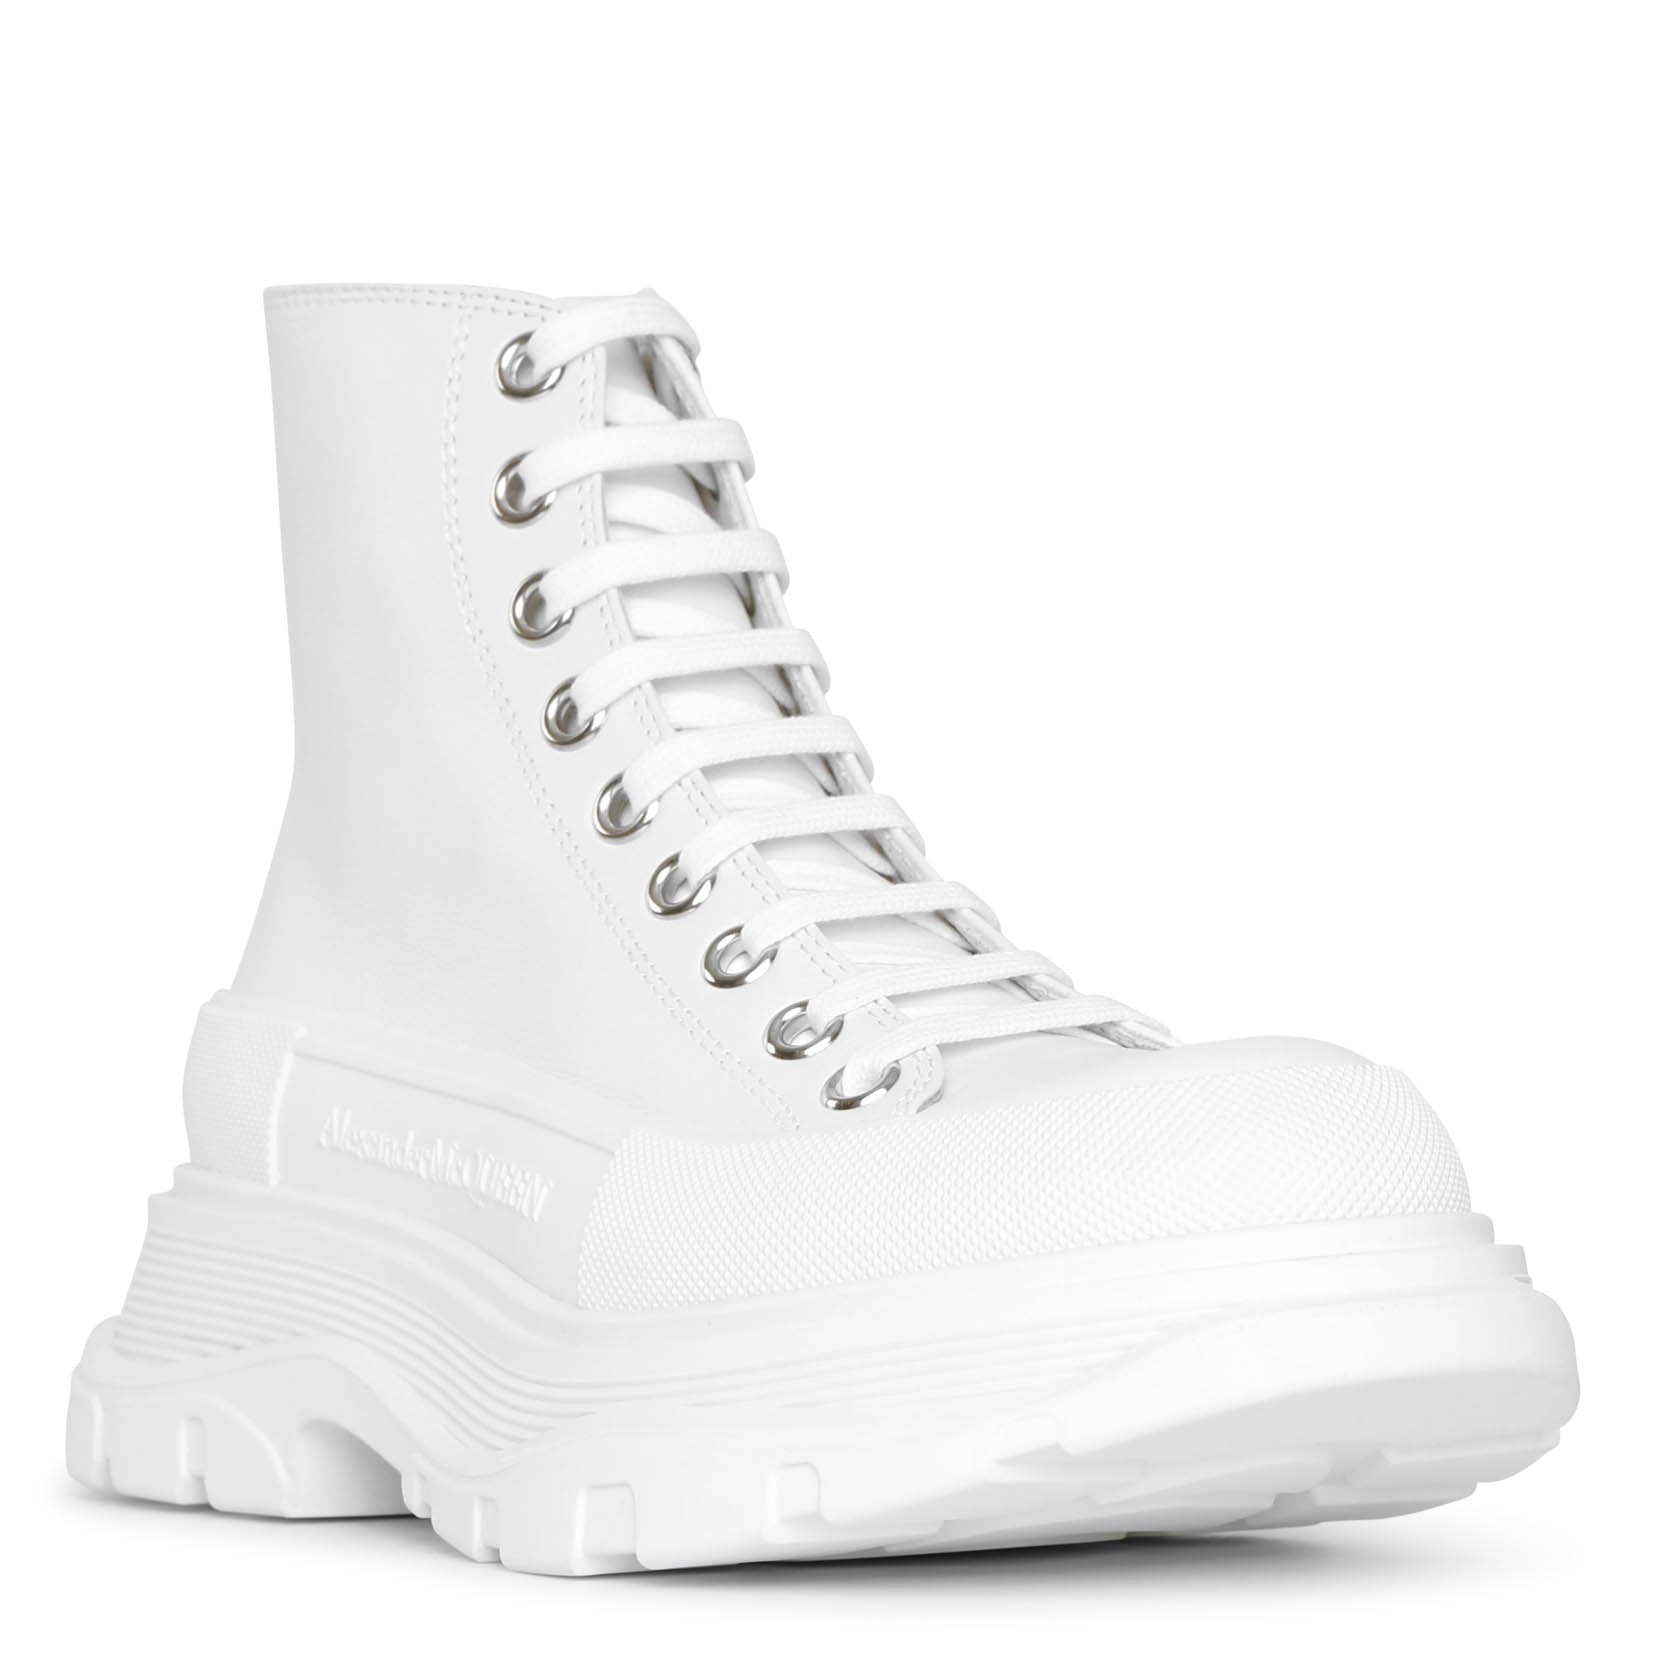 Tread slick high top white leather boots